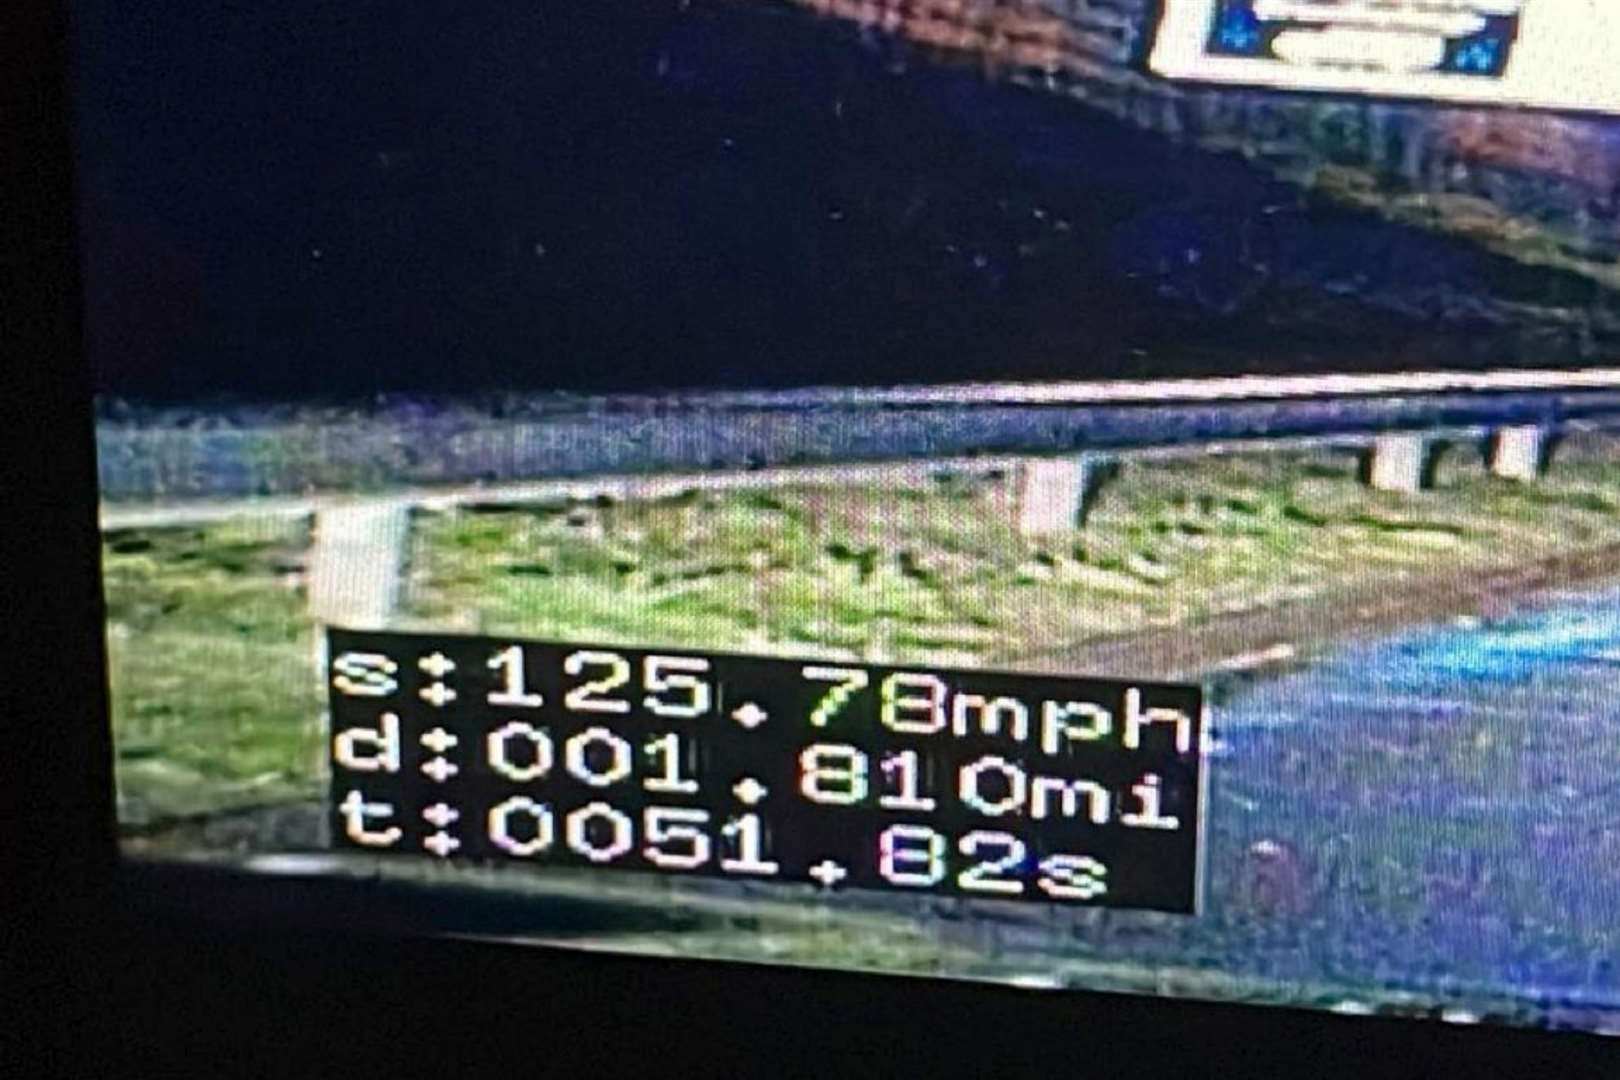 The driver was caught at more than 125mph. Photo: Kent Police RPU